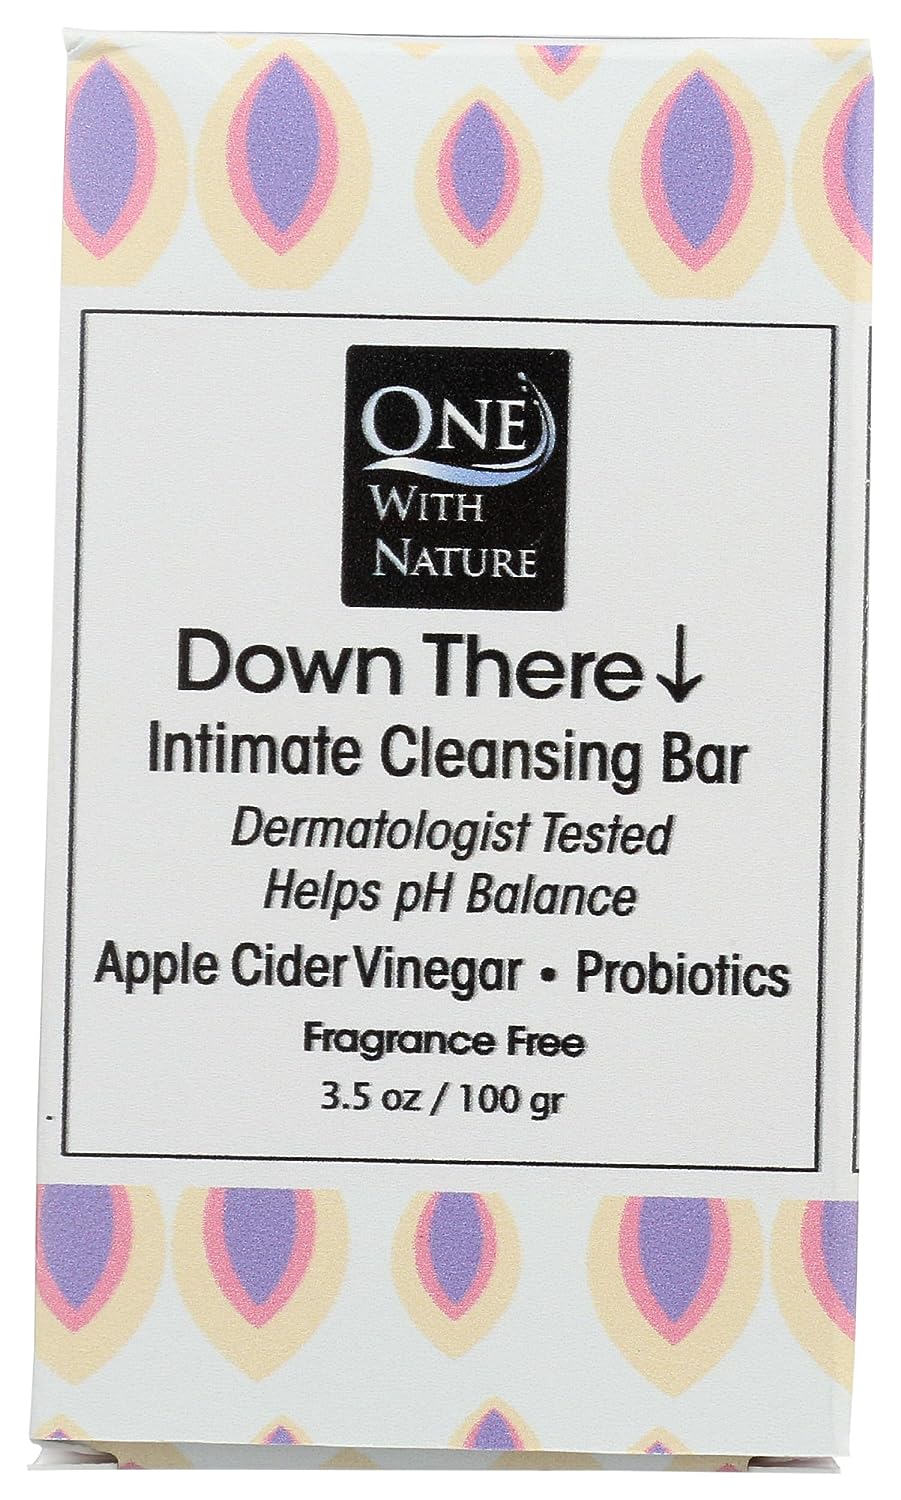 One With Nature Down There Fragrance Free Intimate Cleansing Soap Bar, 3.5